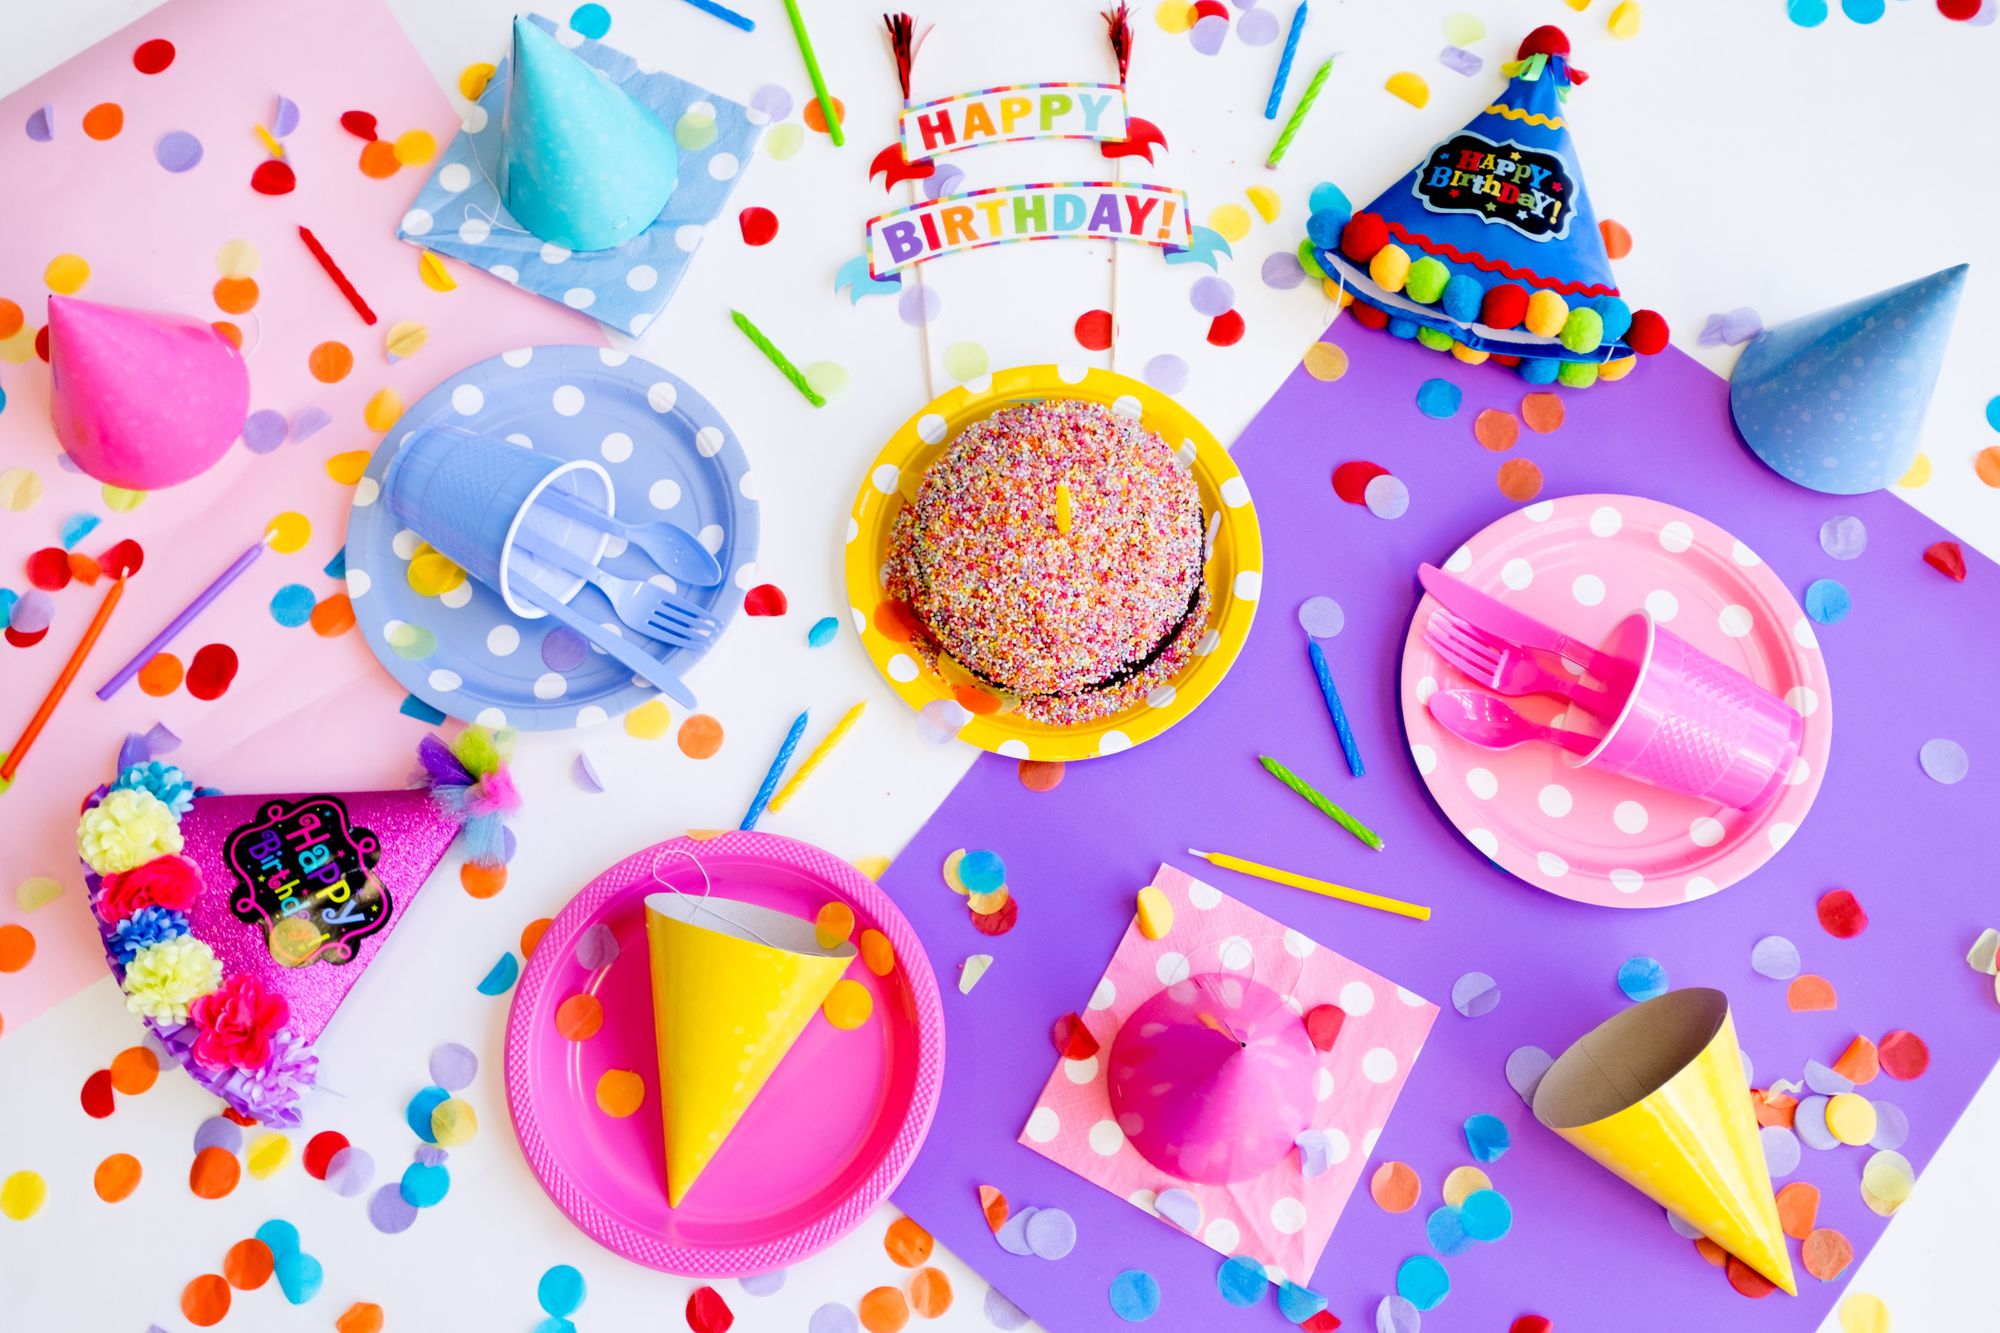 Event planning and birthday party side hustle for moms